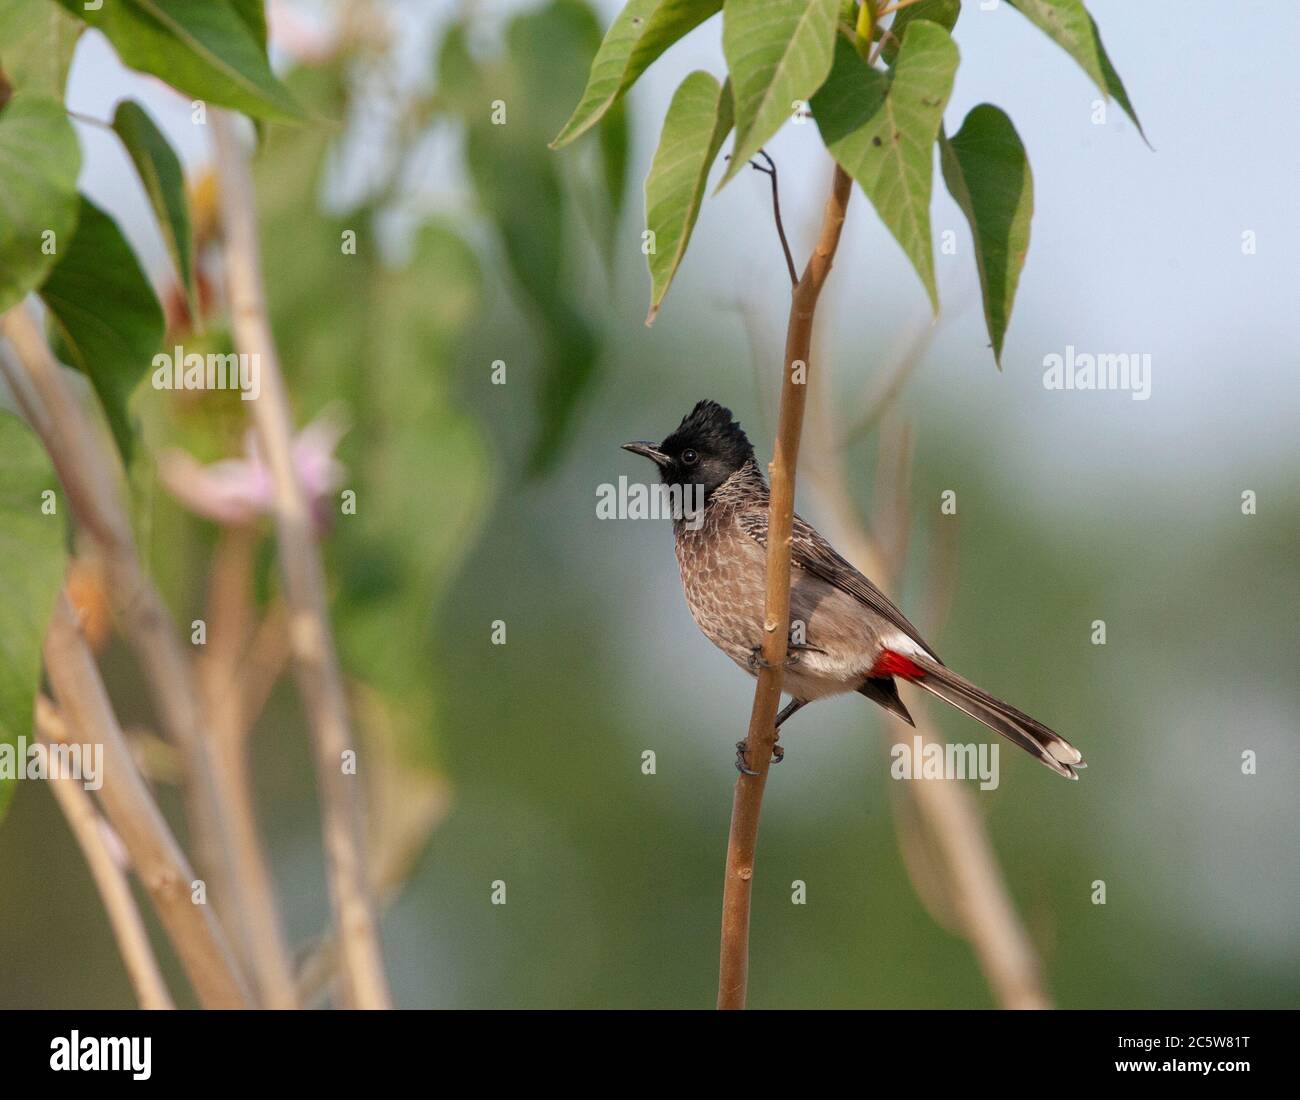 Adult Red-vented Bulbul (Pycnonotus cafer) perched in a small bush. Stock Photo